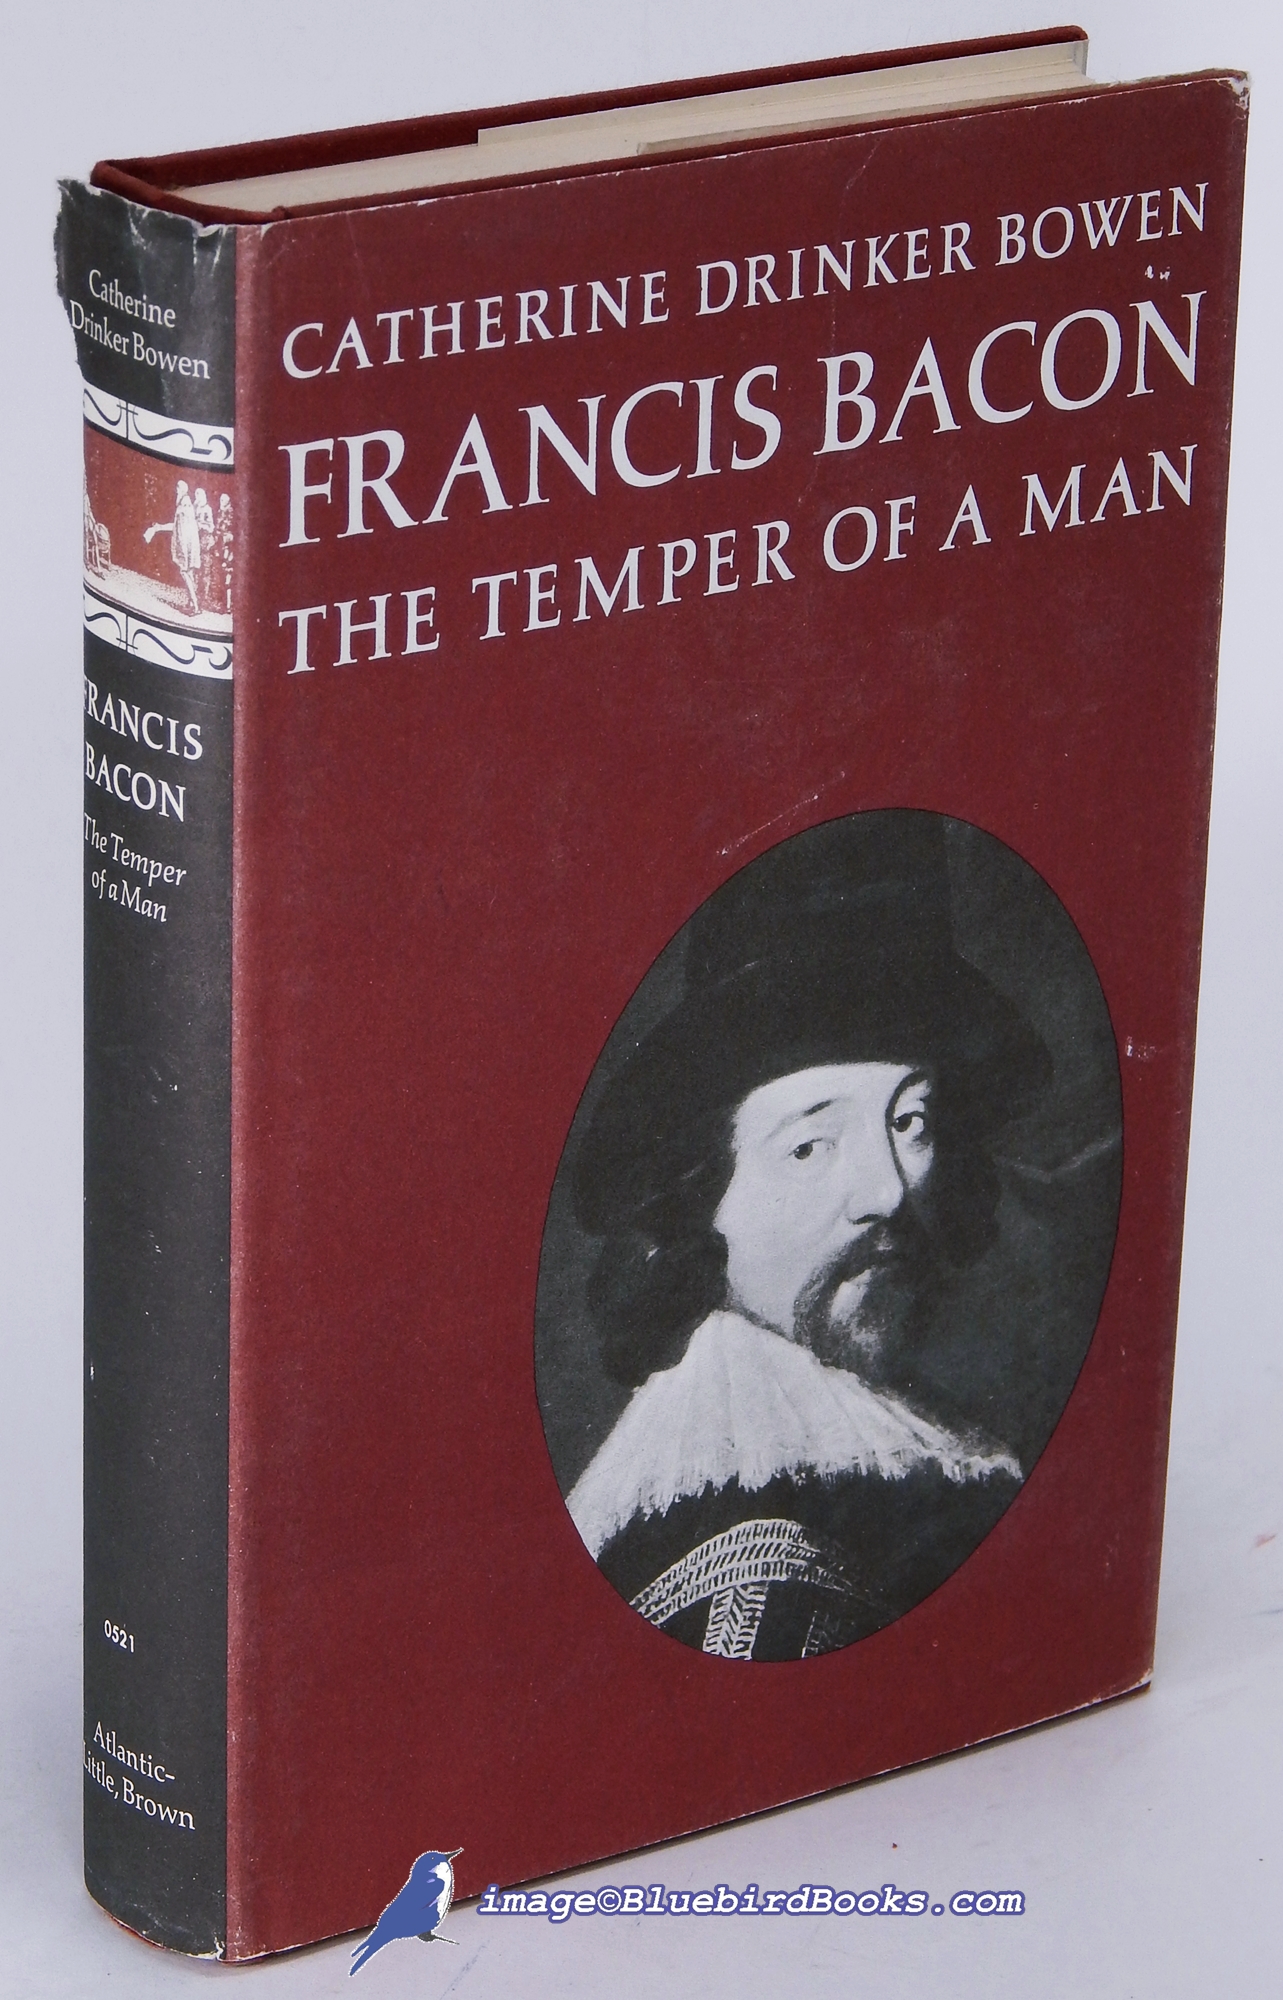 BOWEN, CATHERINE DRINKER - Francis Bacon: The Temper of a Man